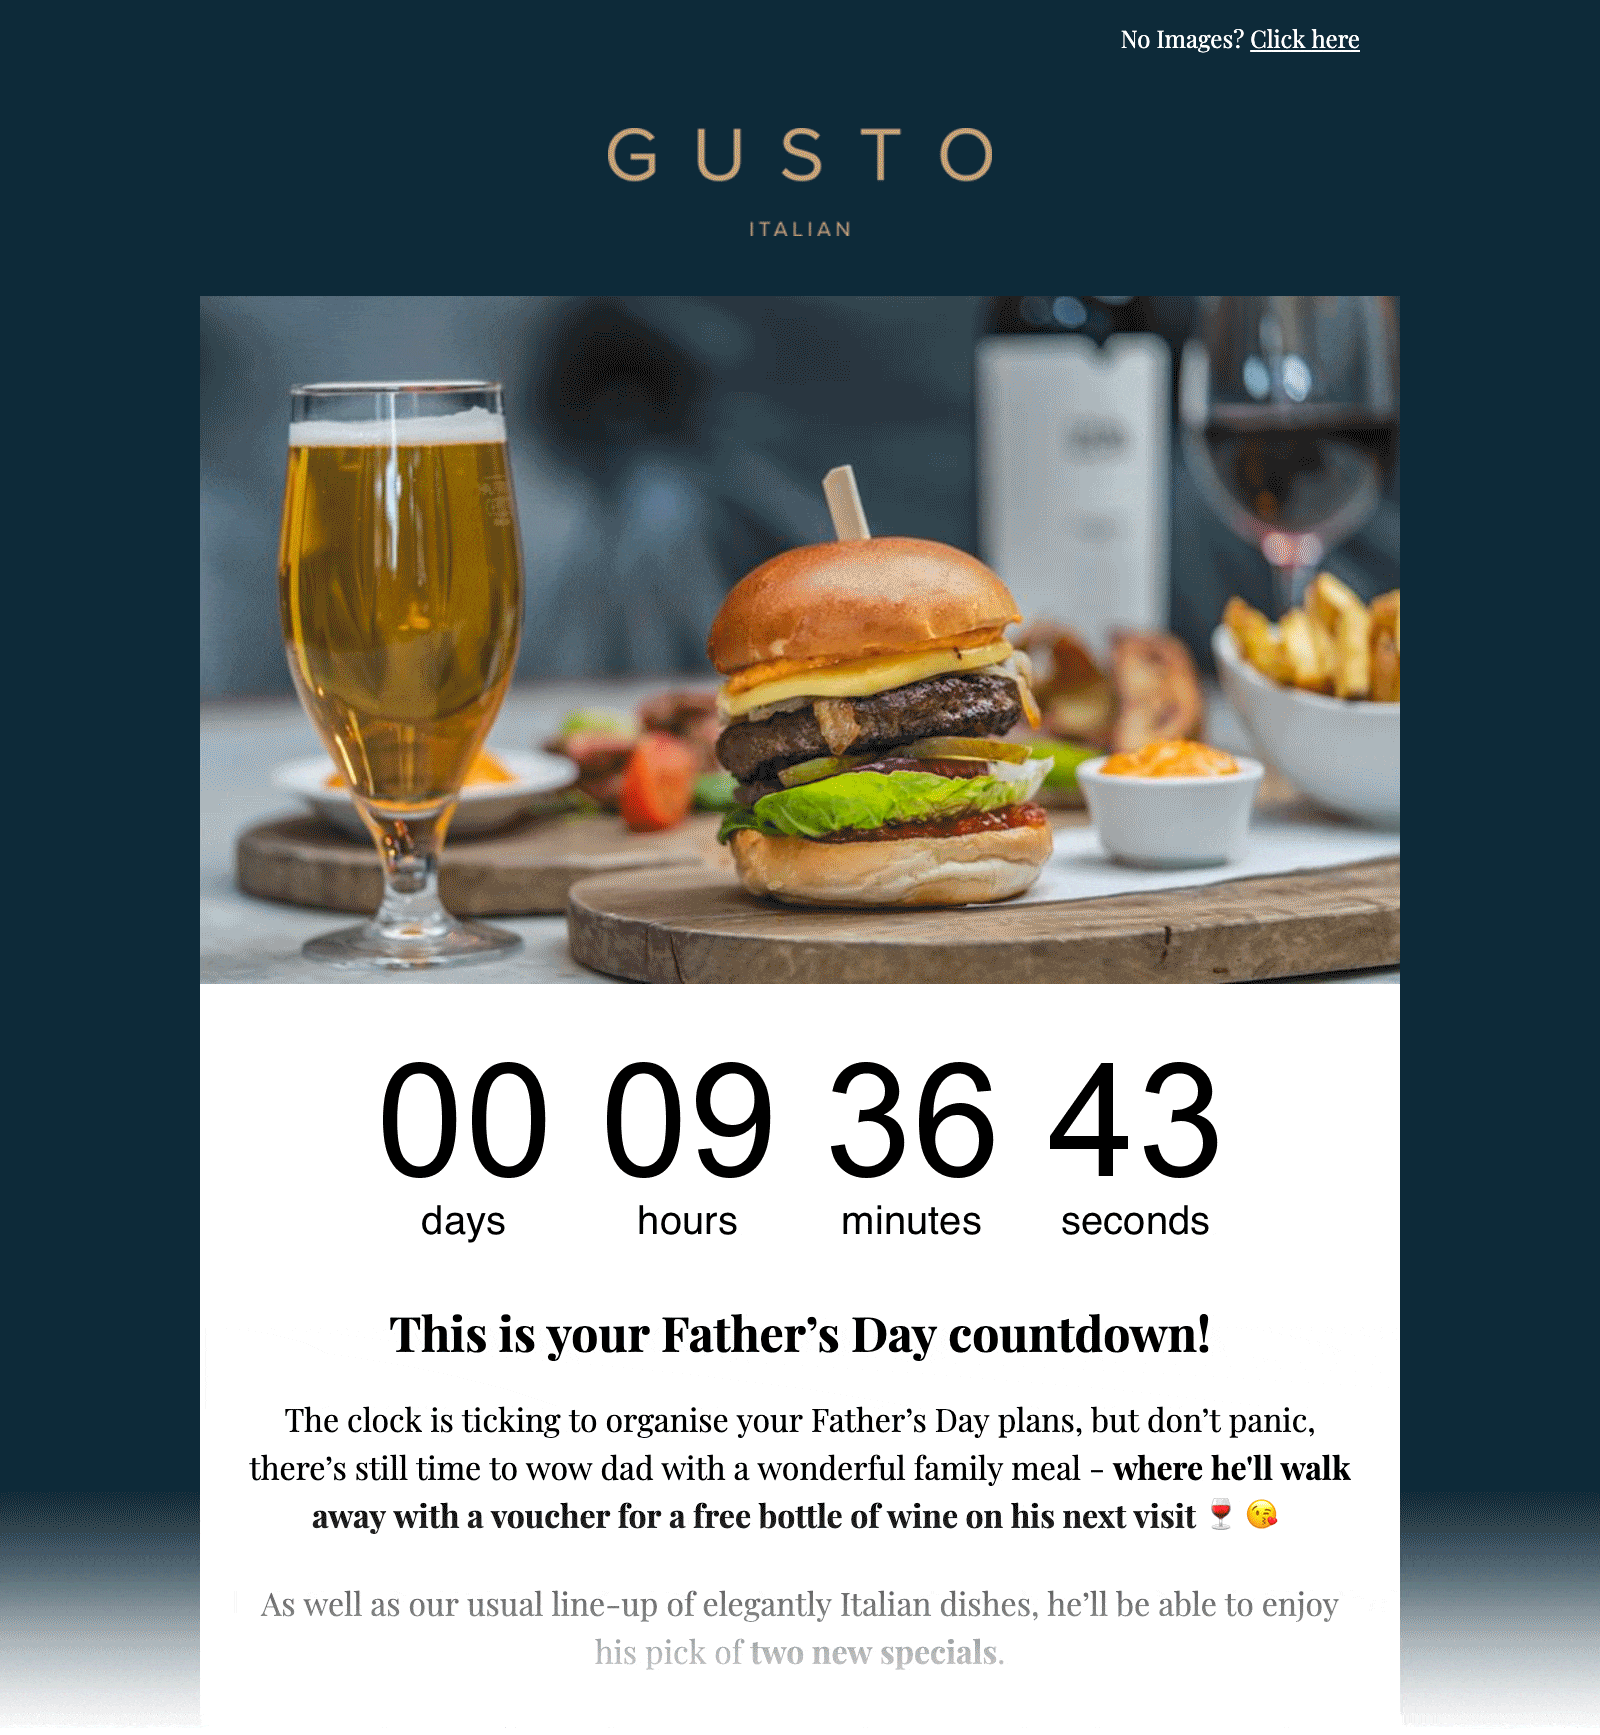 This email from Gusto uses Countdown to great effect. They add urgency and see great results from their email marketing.